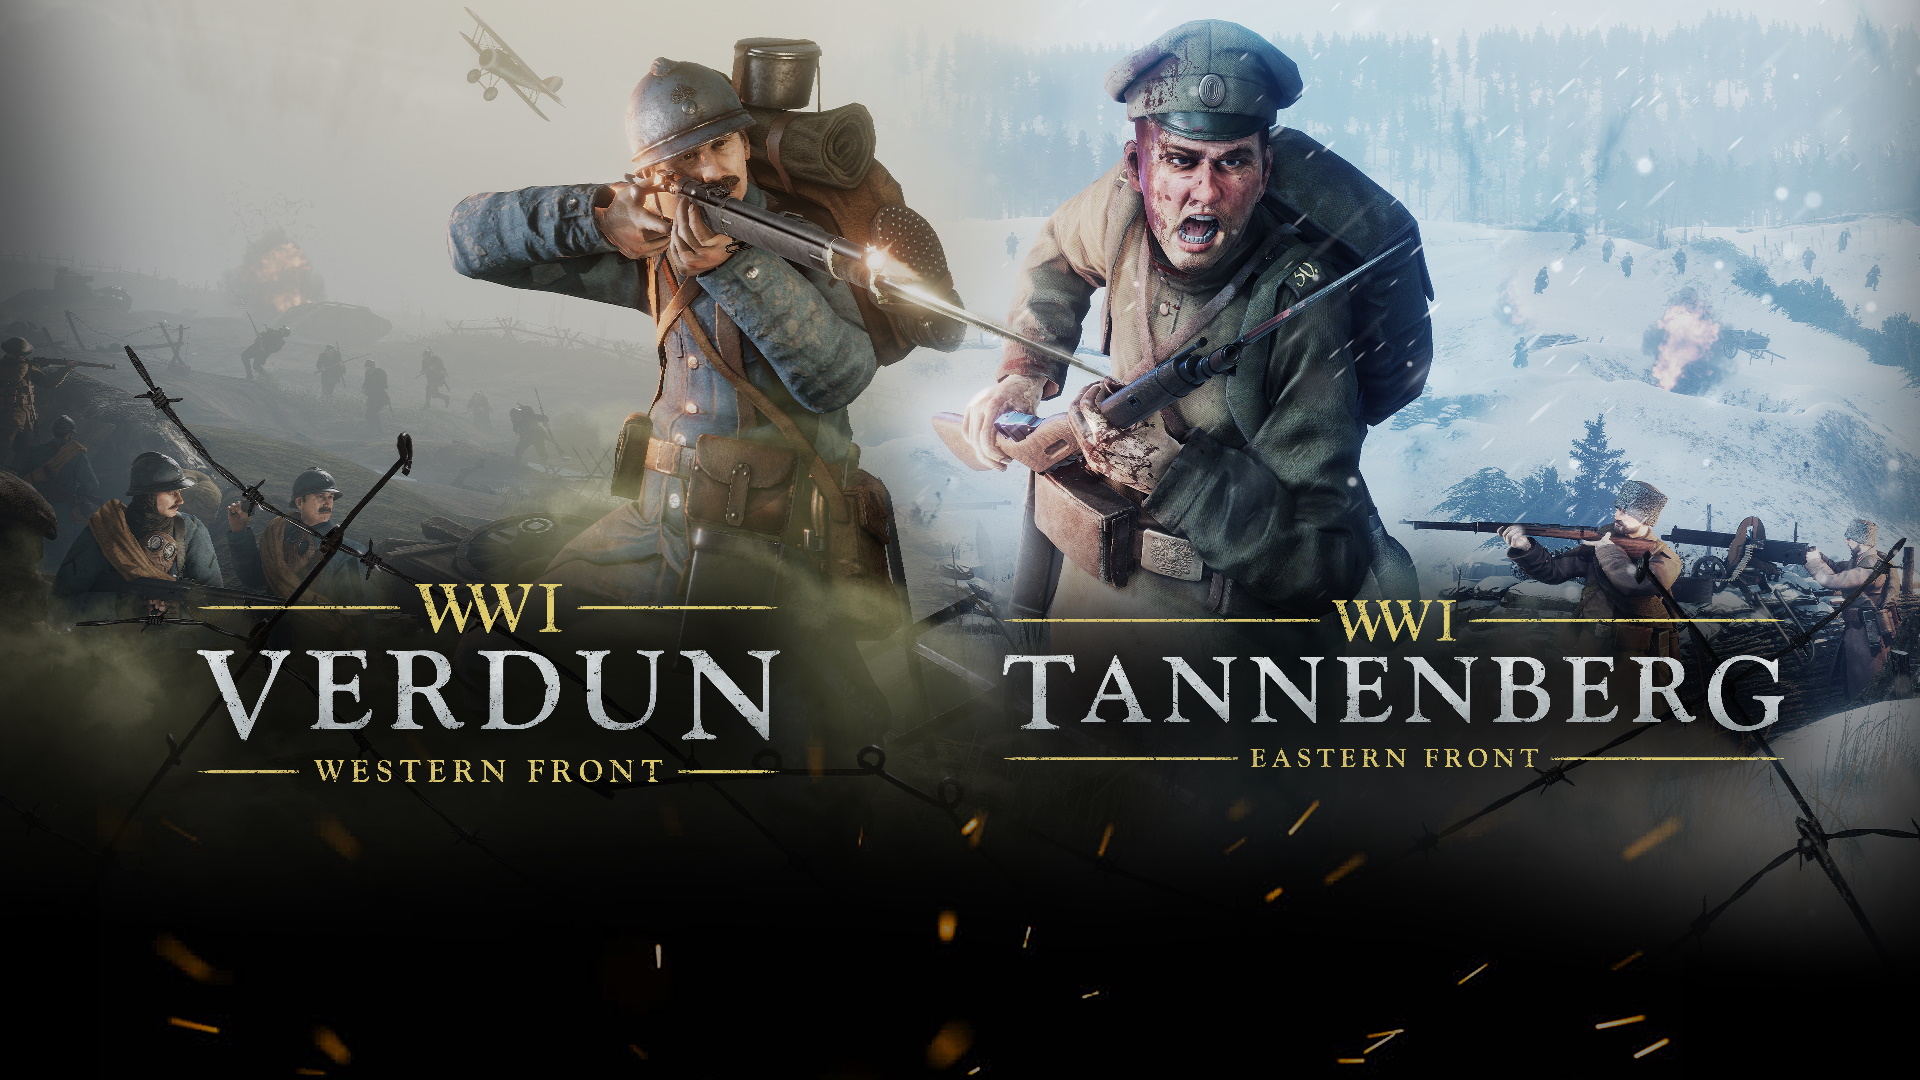 wwi tannenberg eastern front ps4